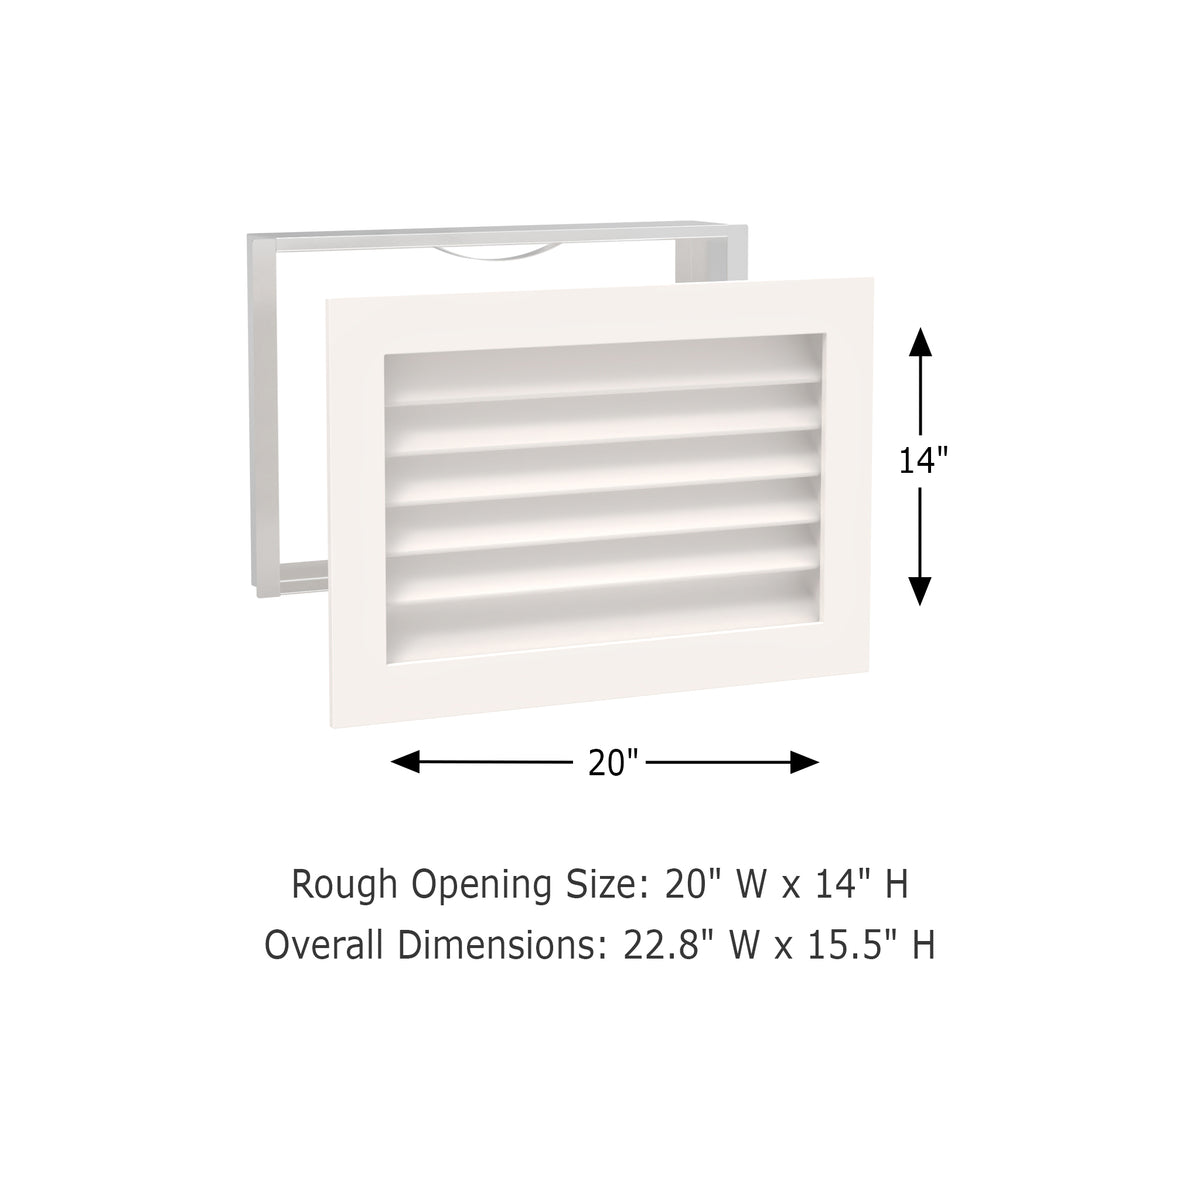 Worth Home Products - decorative wood AC vent covers luxury return vent - Primed Wood Louvers 20x14